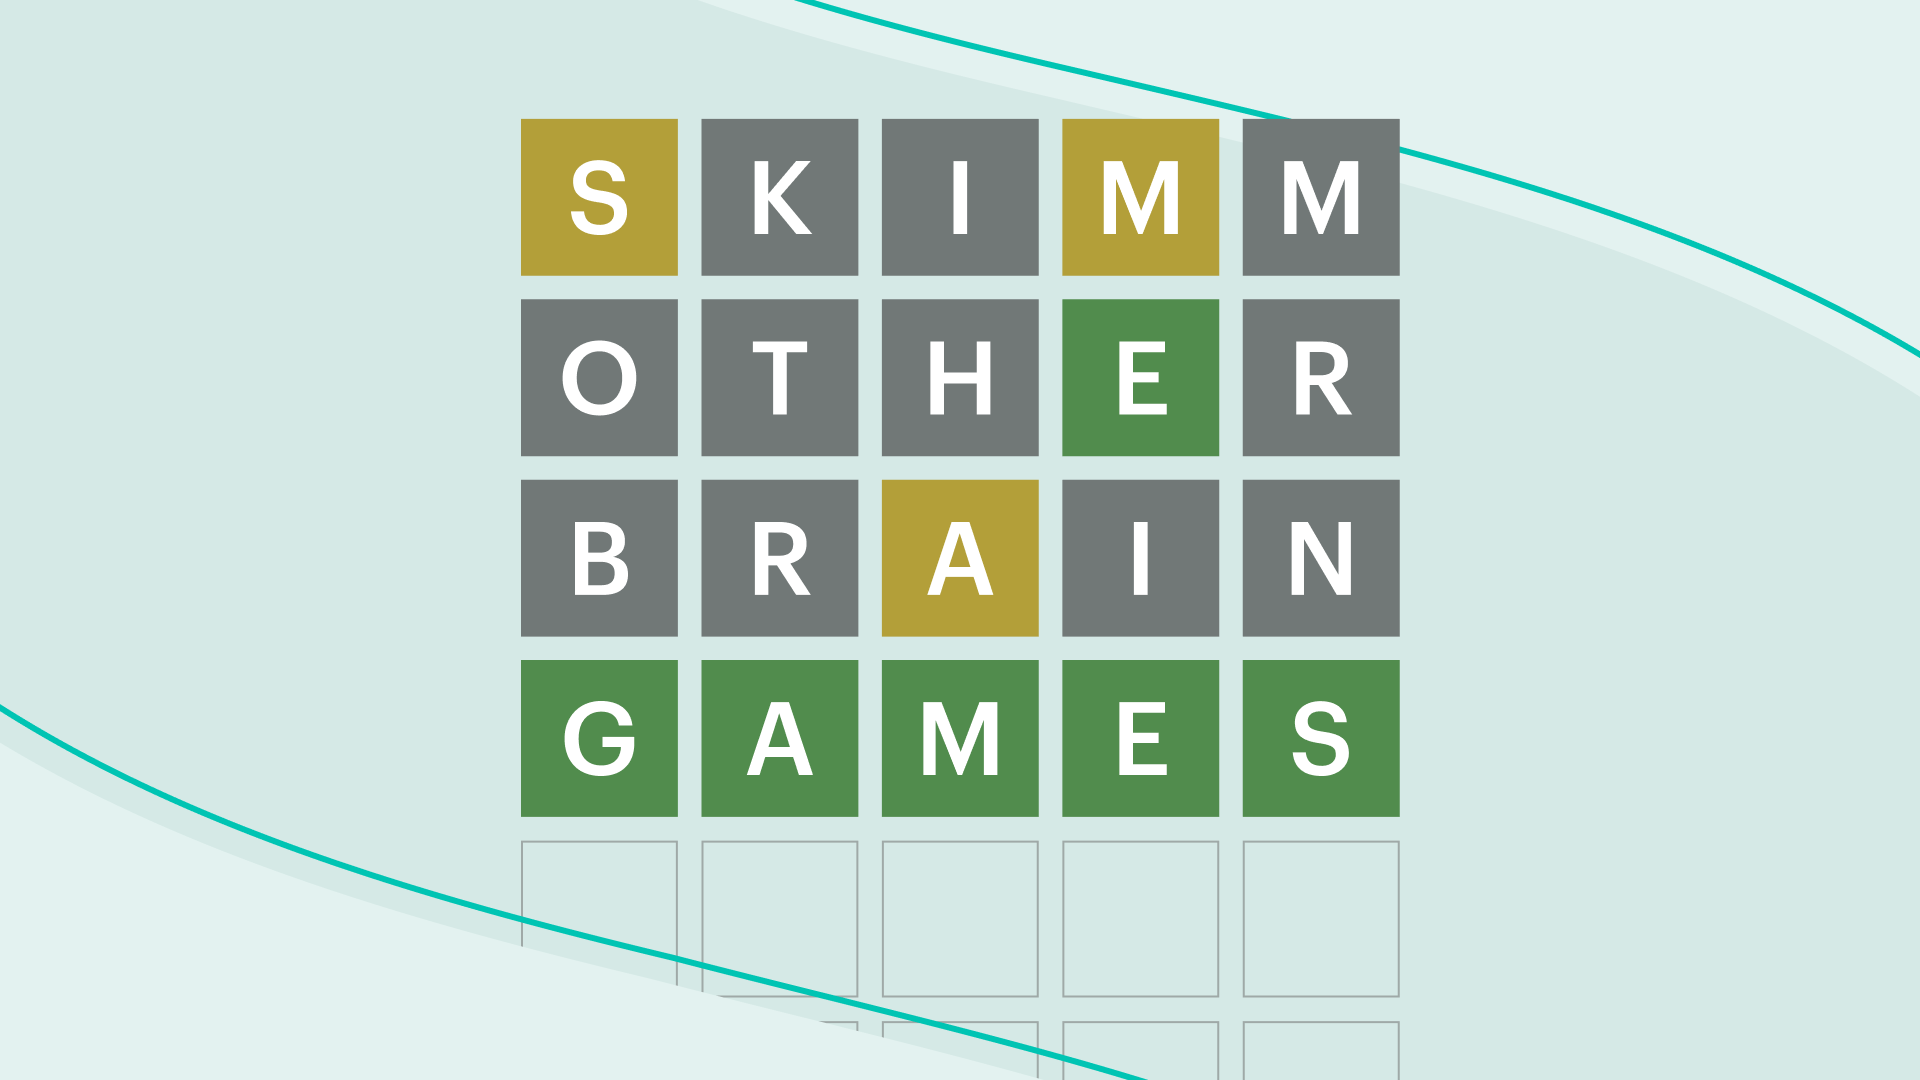 Games like Wordle: 10 alternative word games to play online and in person